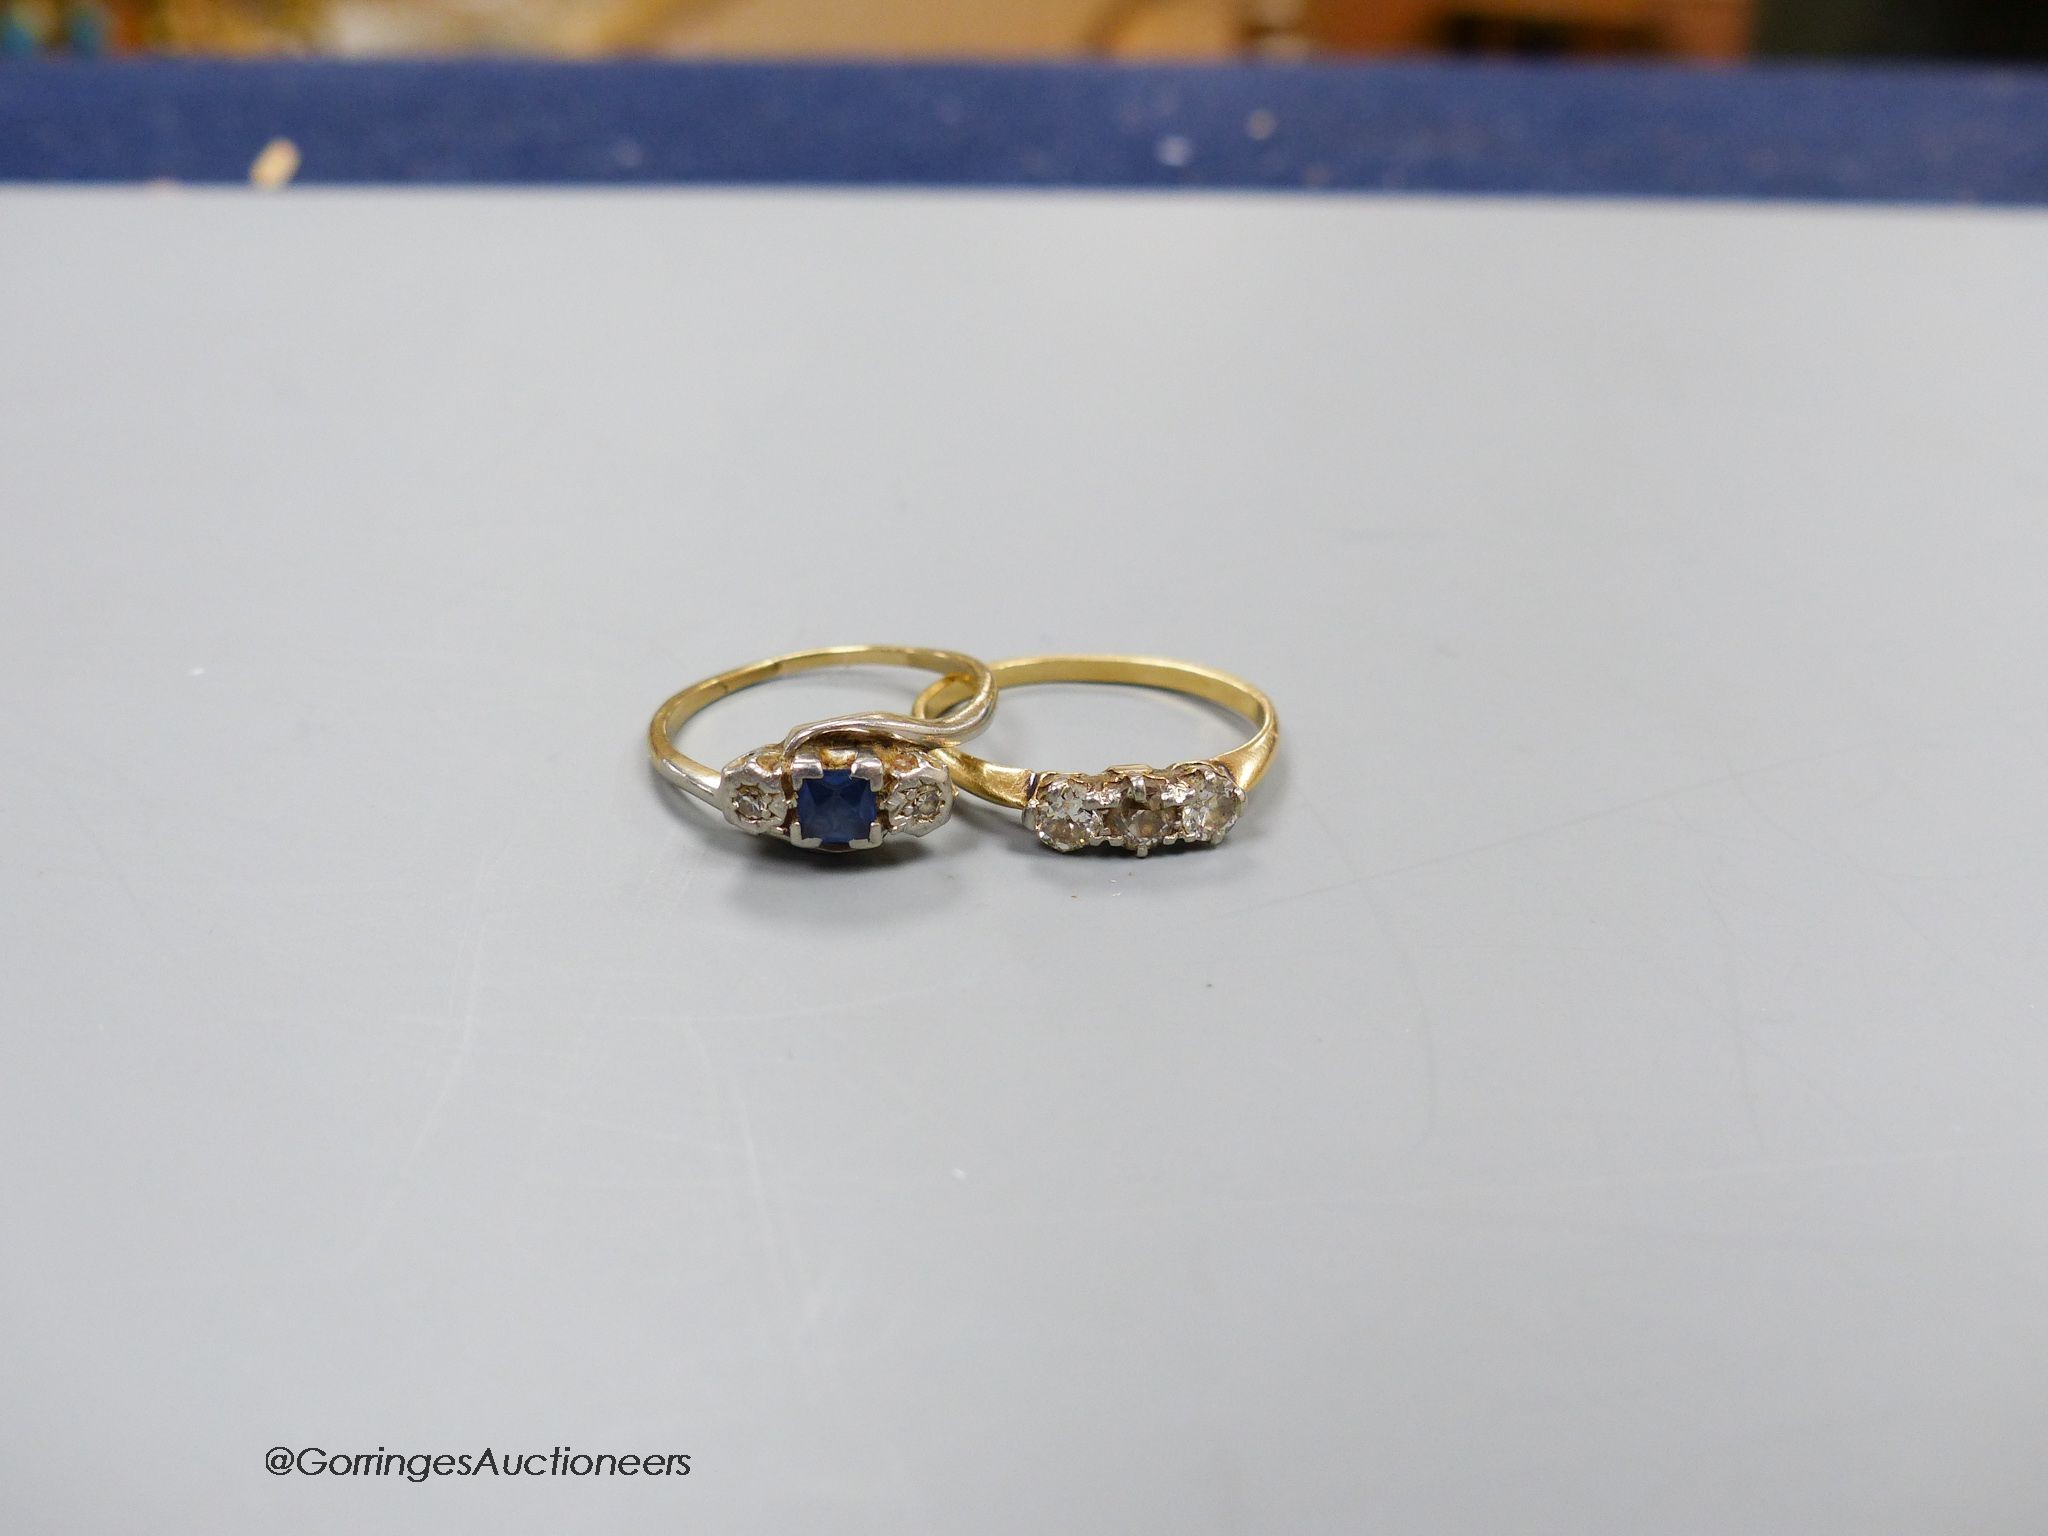 A three stone diamond ring, size M, 2.4g, and a three stone diamond and sapphire ring, size O, 2.5g.